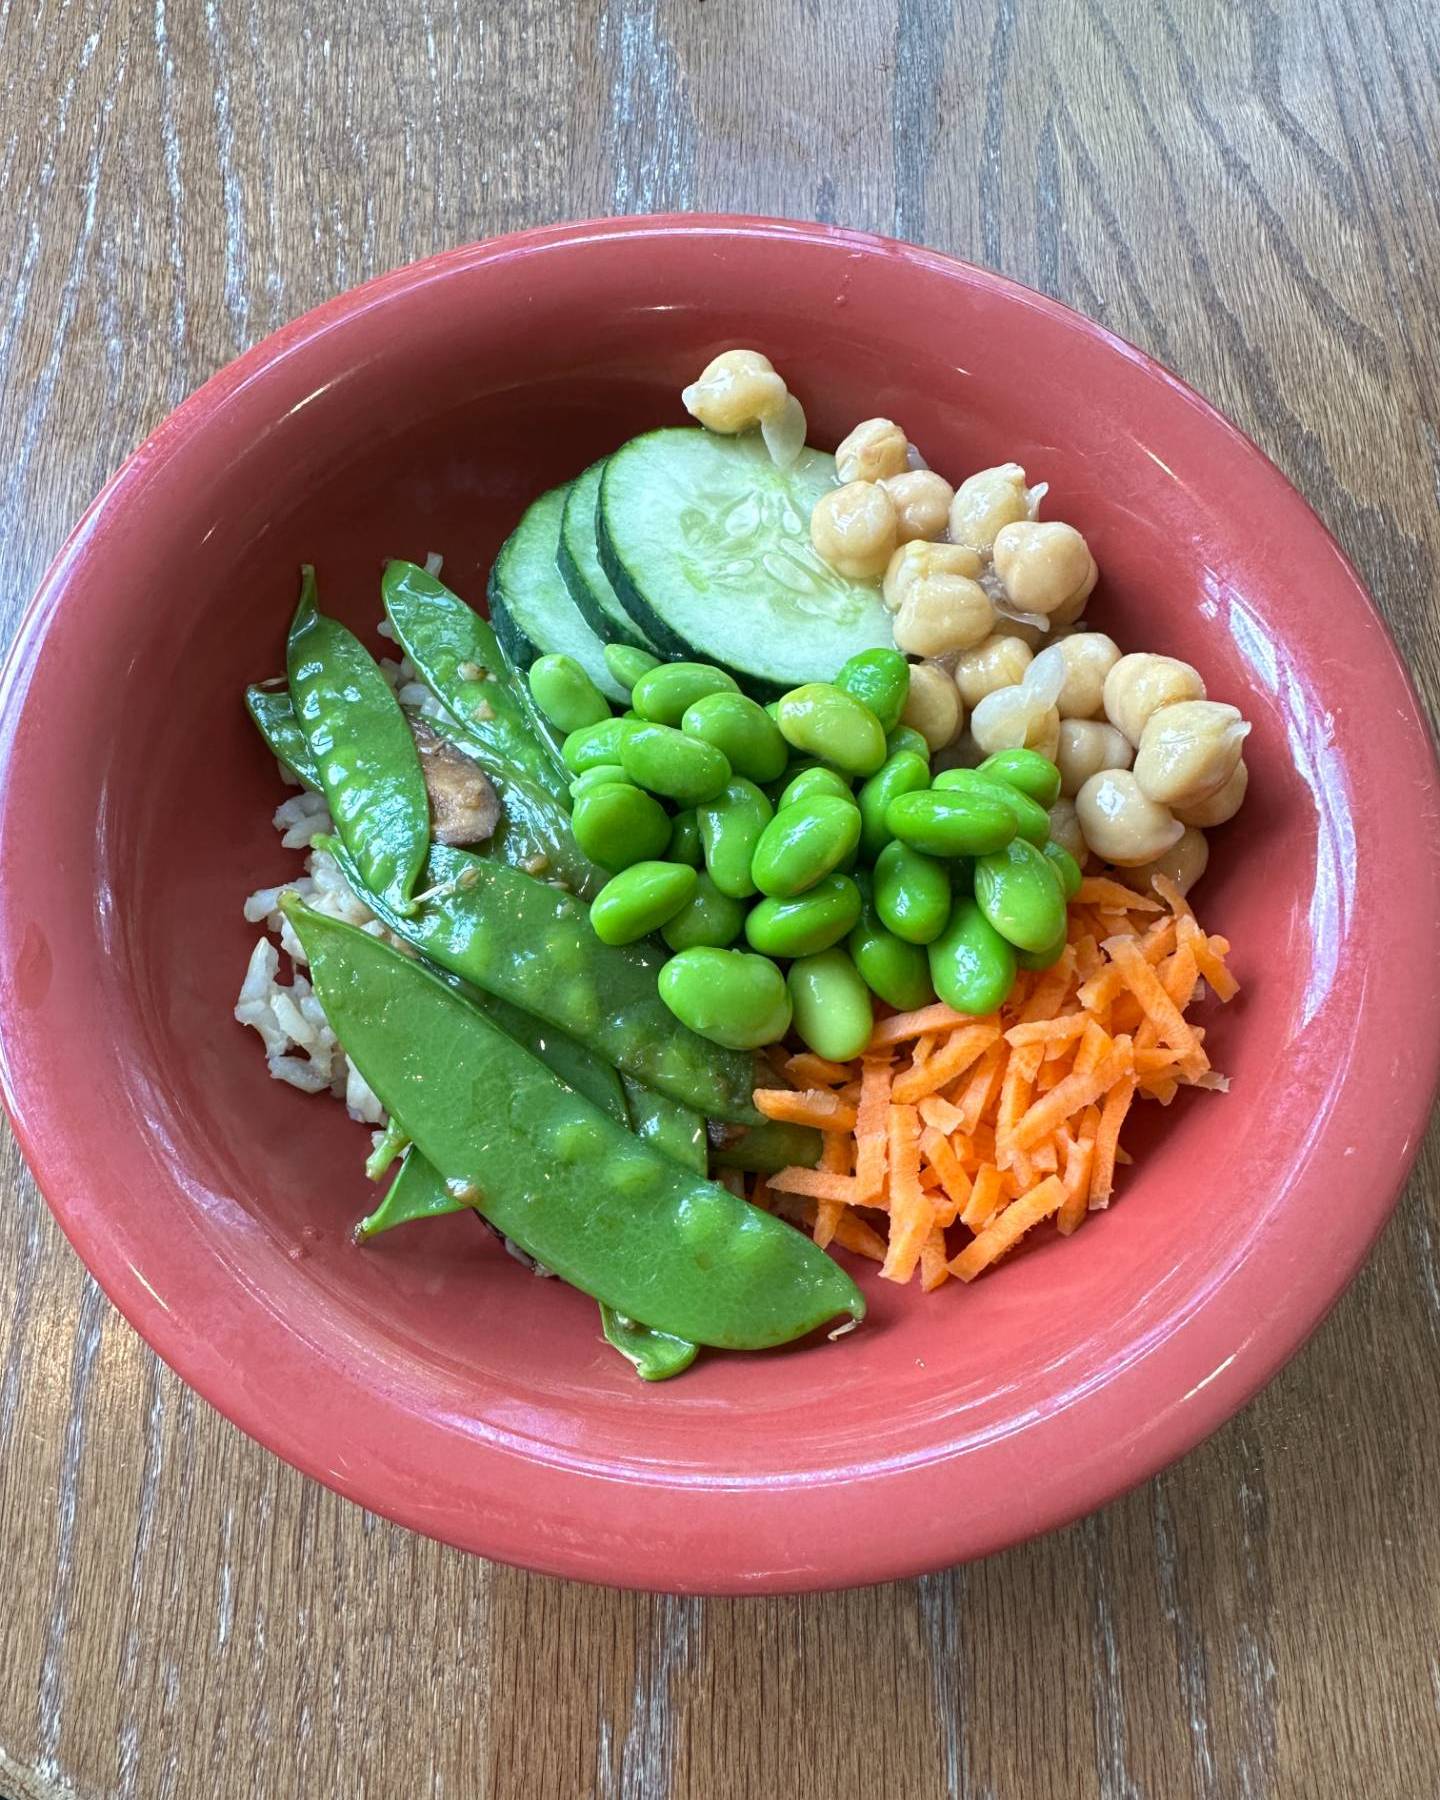 A photograph of a red bowl with chickpeas, cucumbers, edamame, spring peas, shredded carrots, and rice.